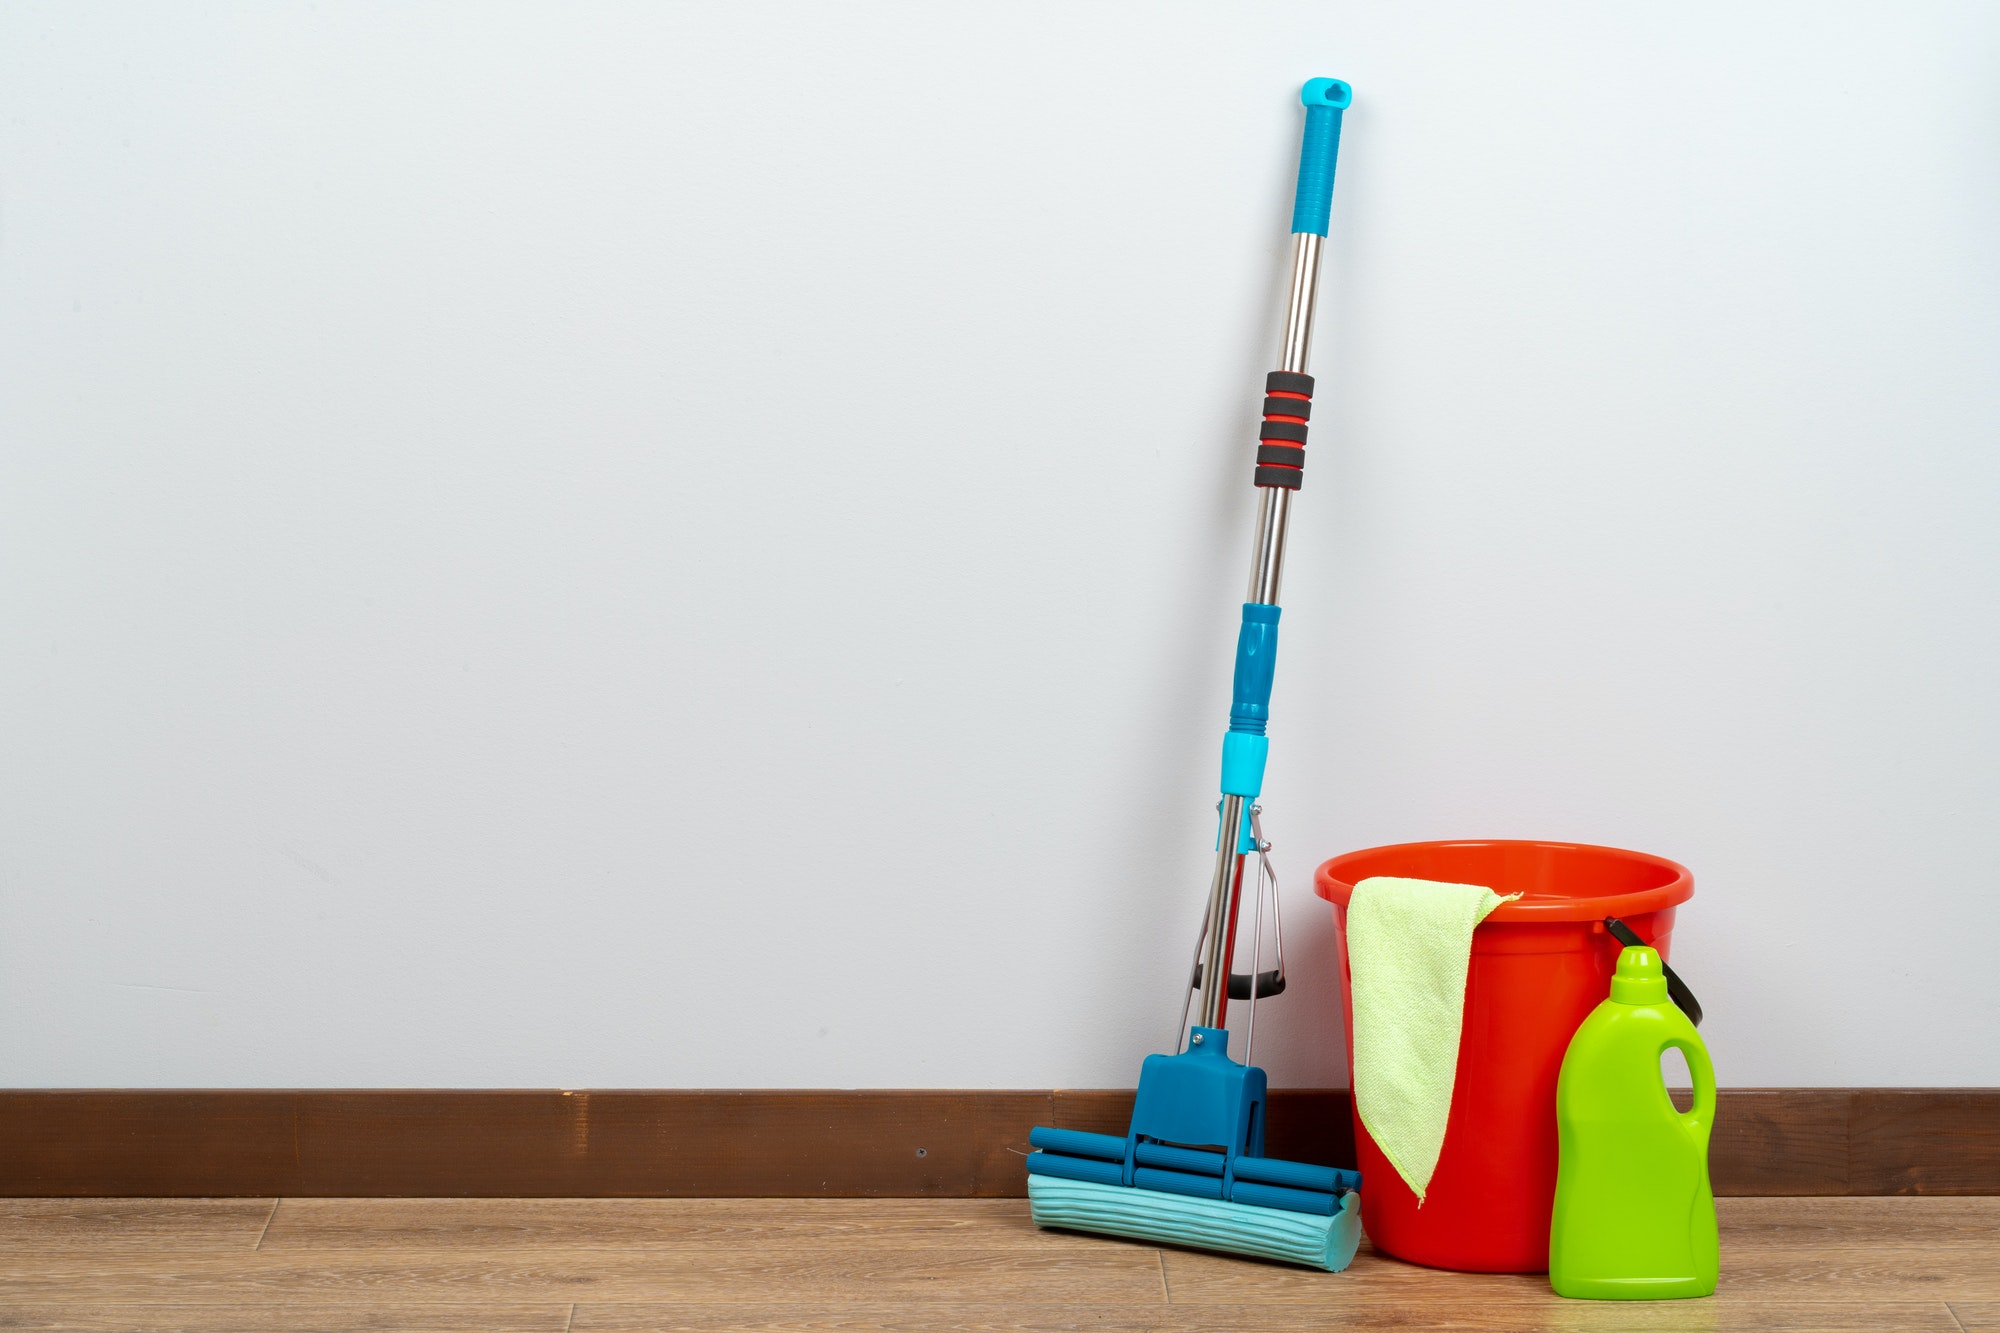 Cleaning tools for house cleaning on wooden floor